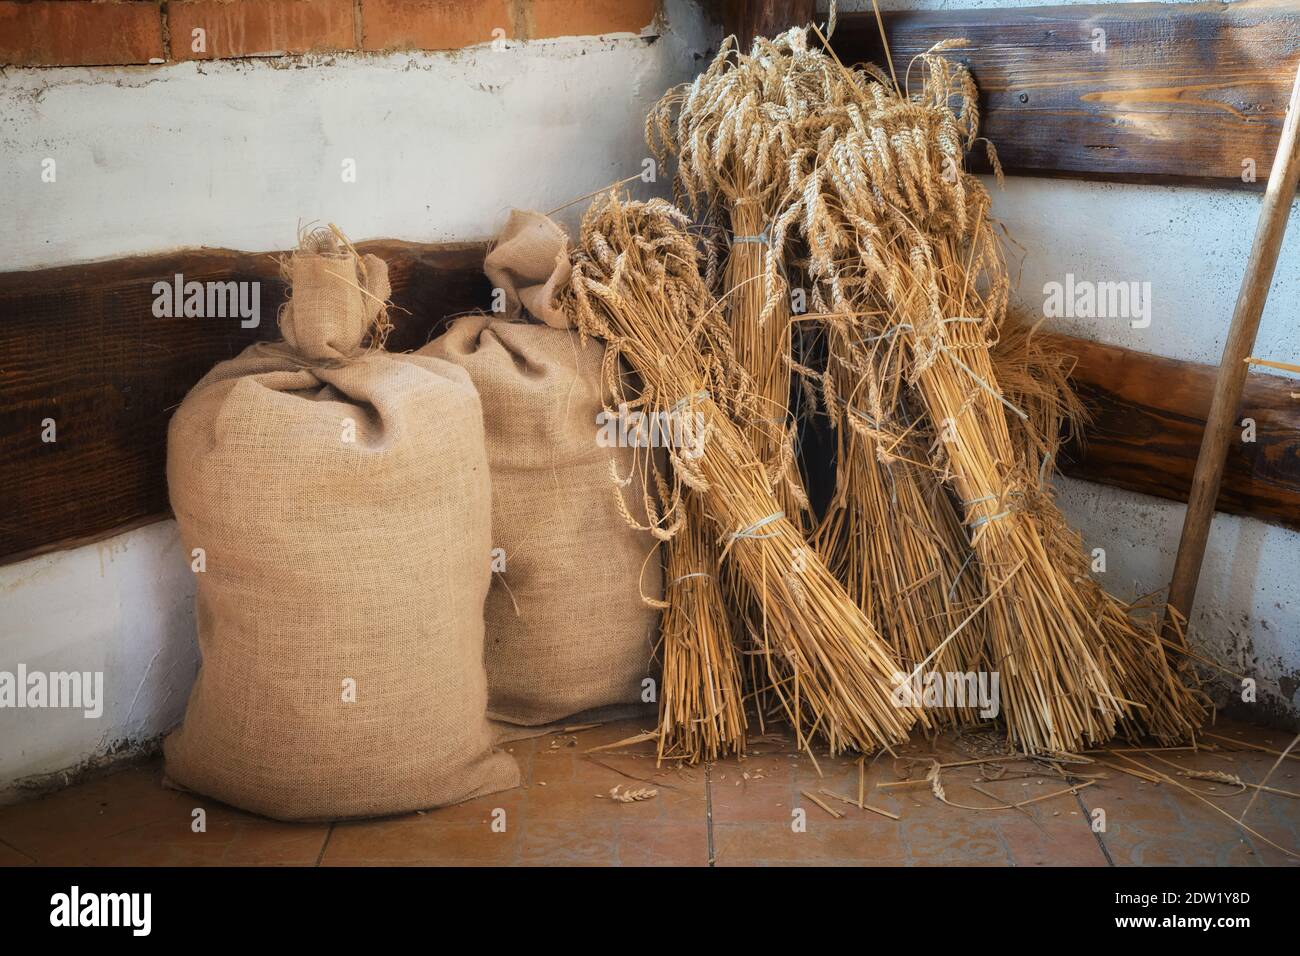 Sheaves of wheat spikelets and bags of flour. Stock Photo